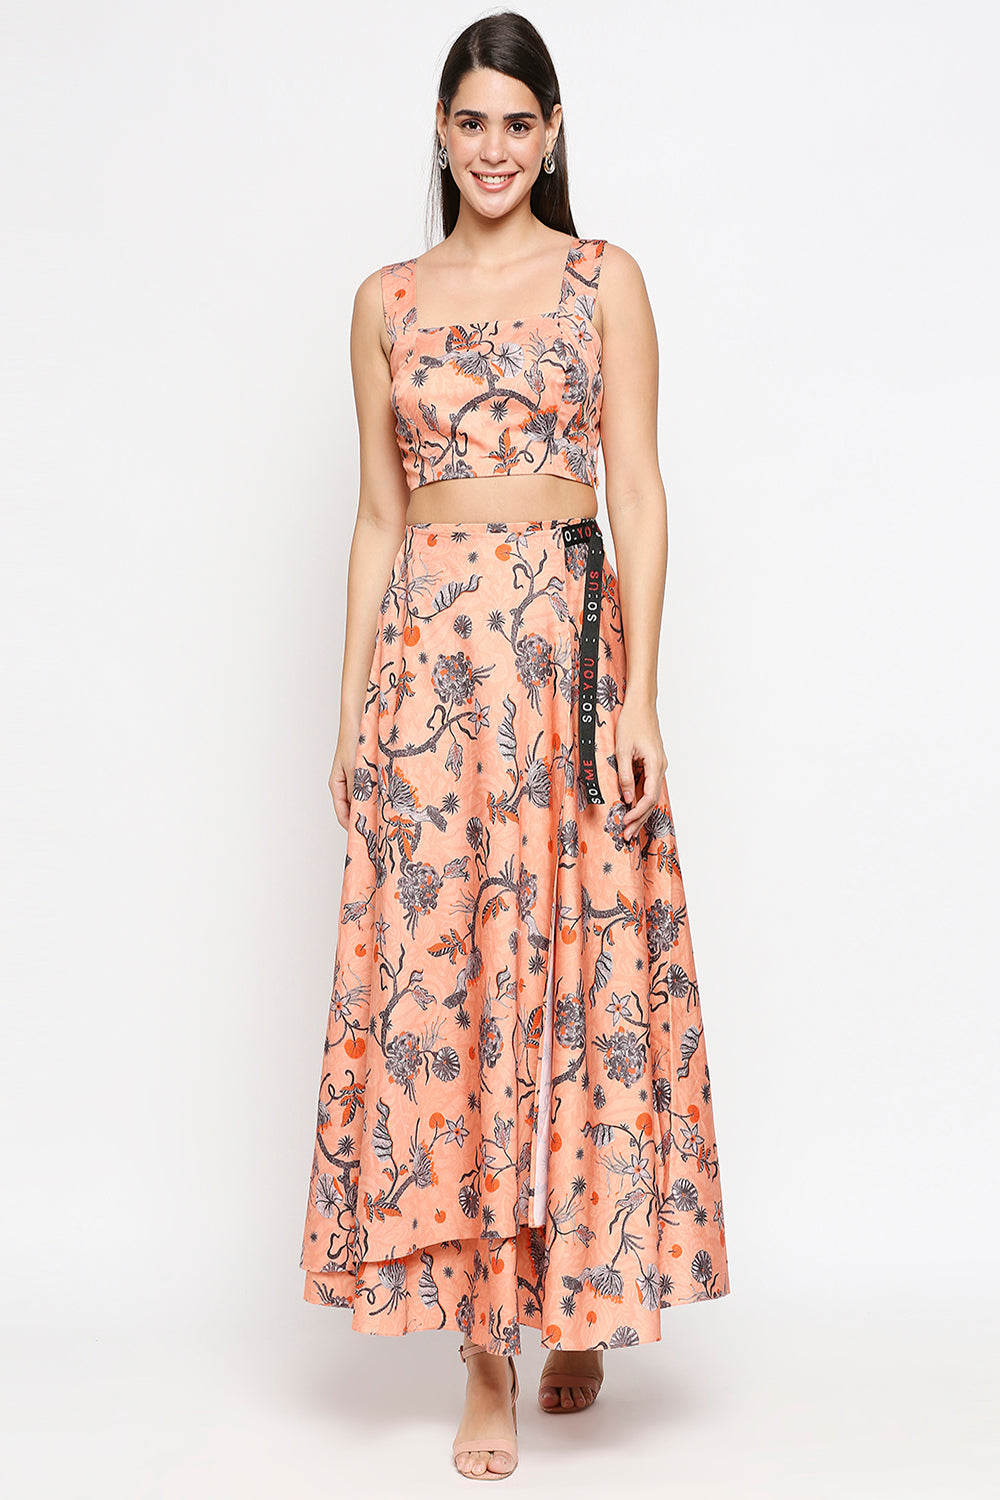 Floral Printed Cotton Twill Bustier Top With Floral Printed Skirt